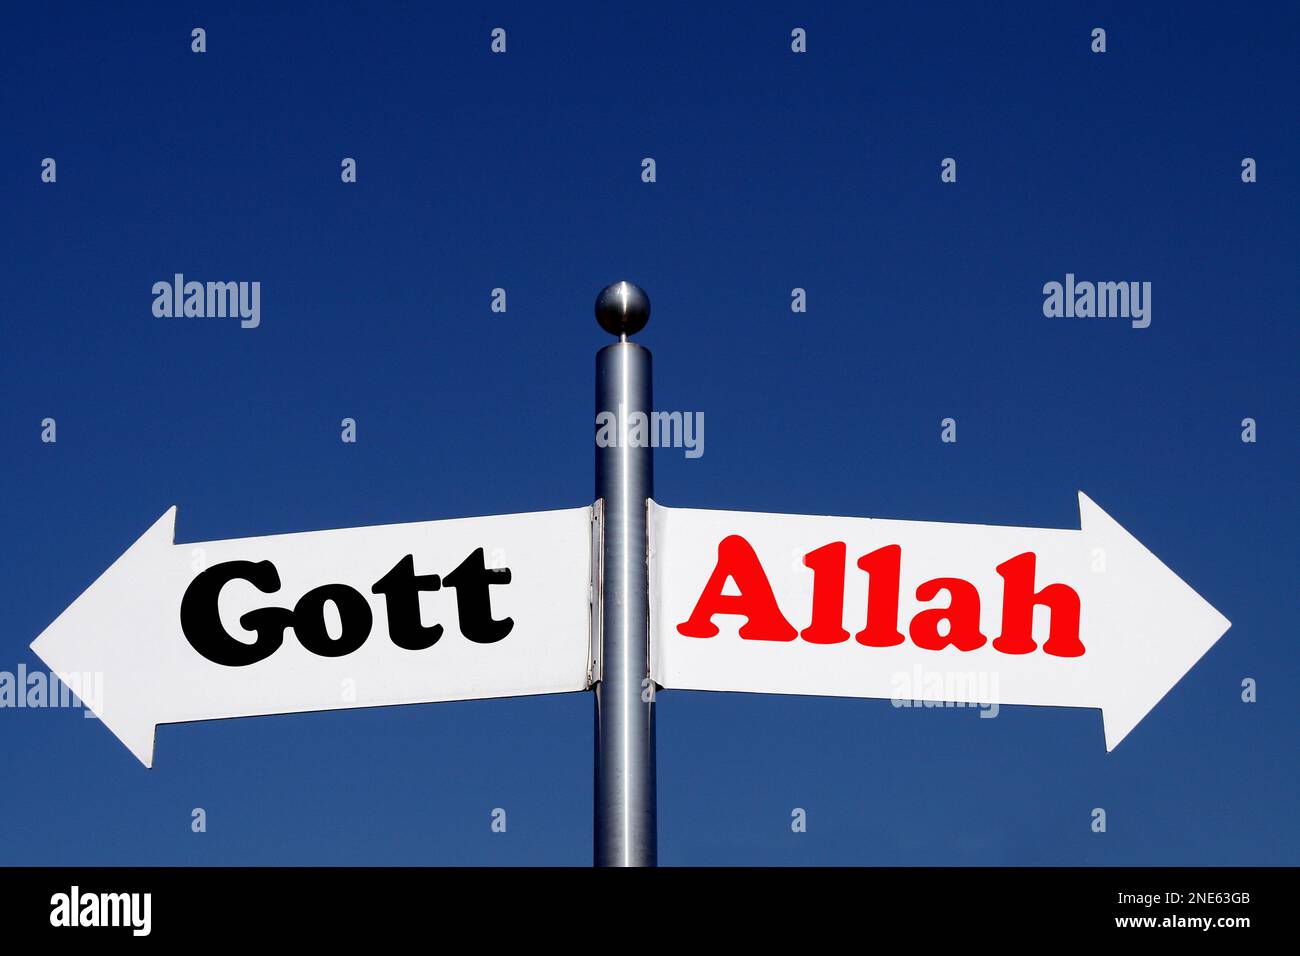 signposts pointing in different directions, options god - allah Stock Photo